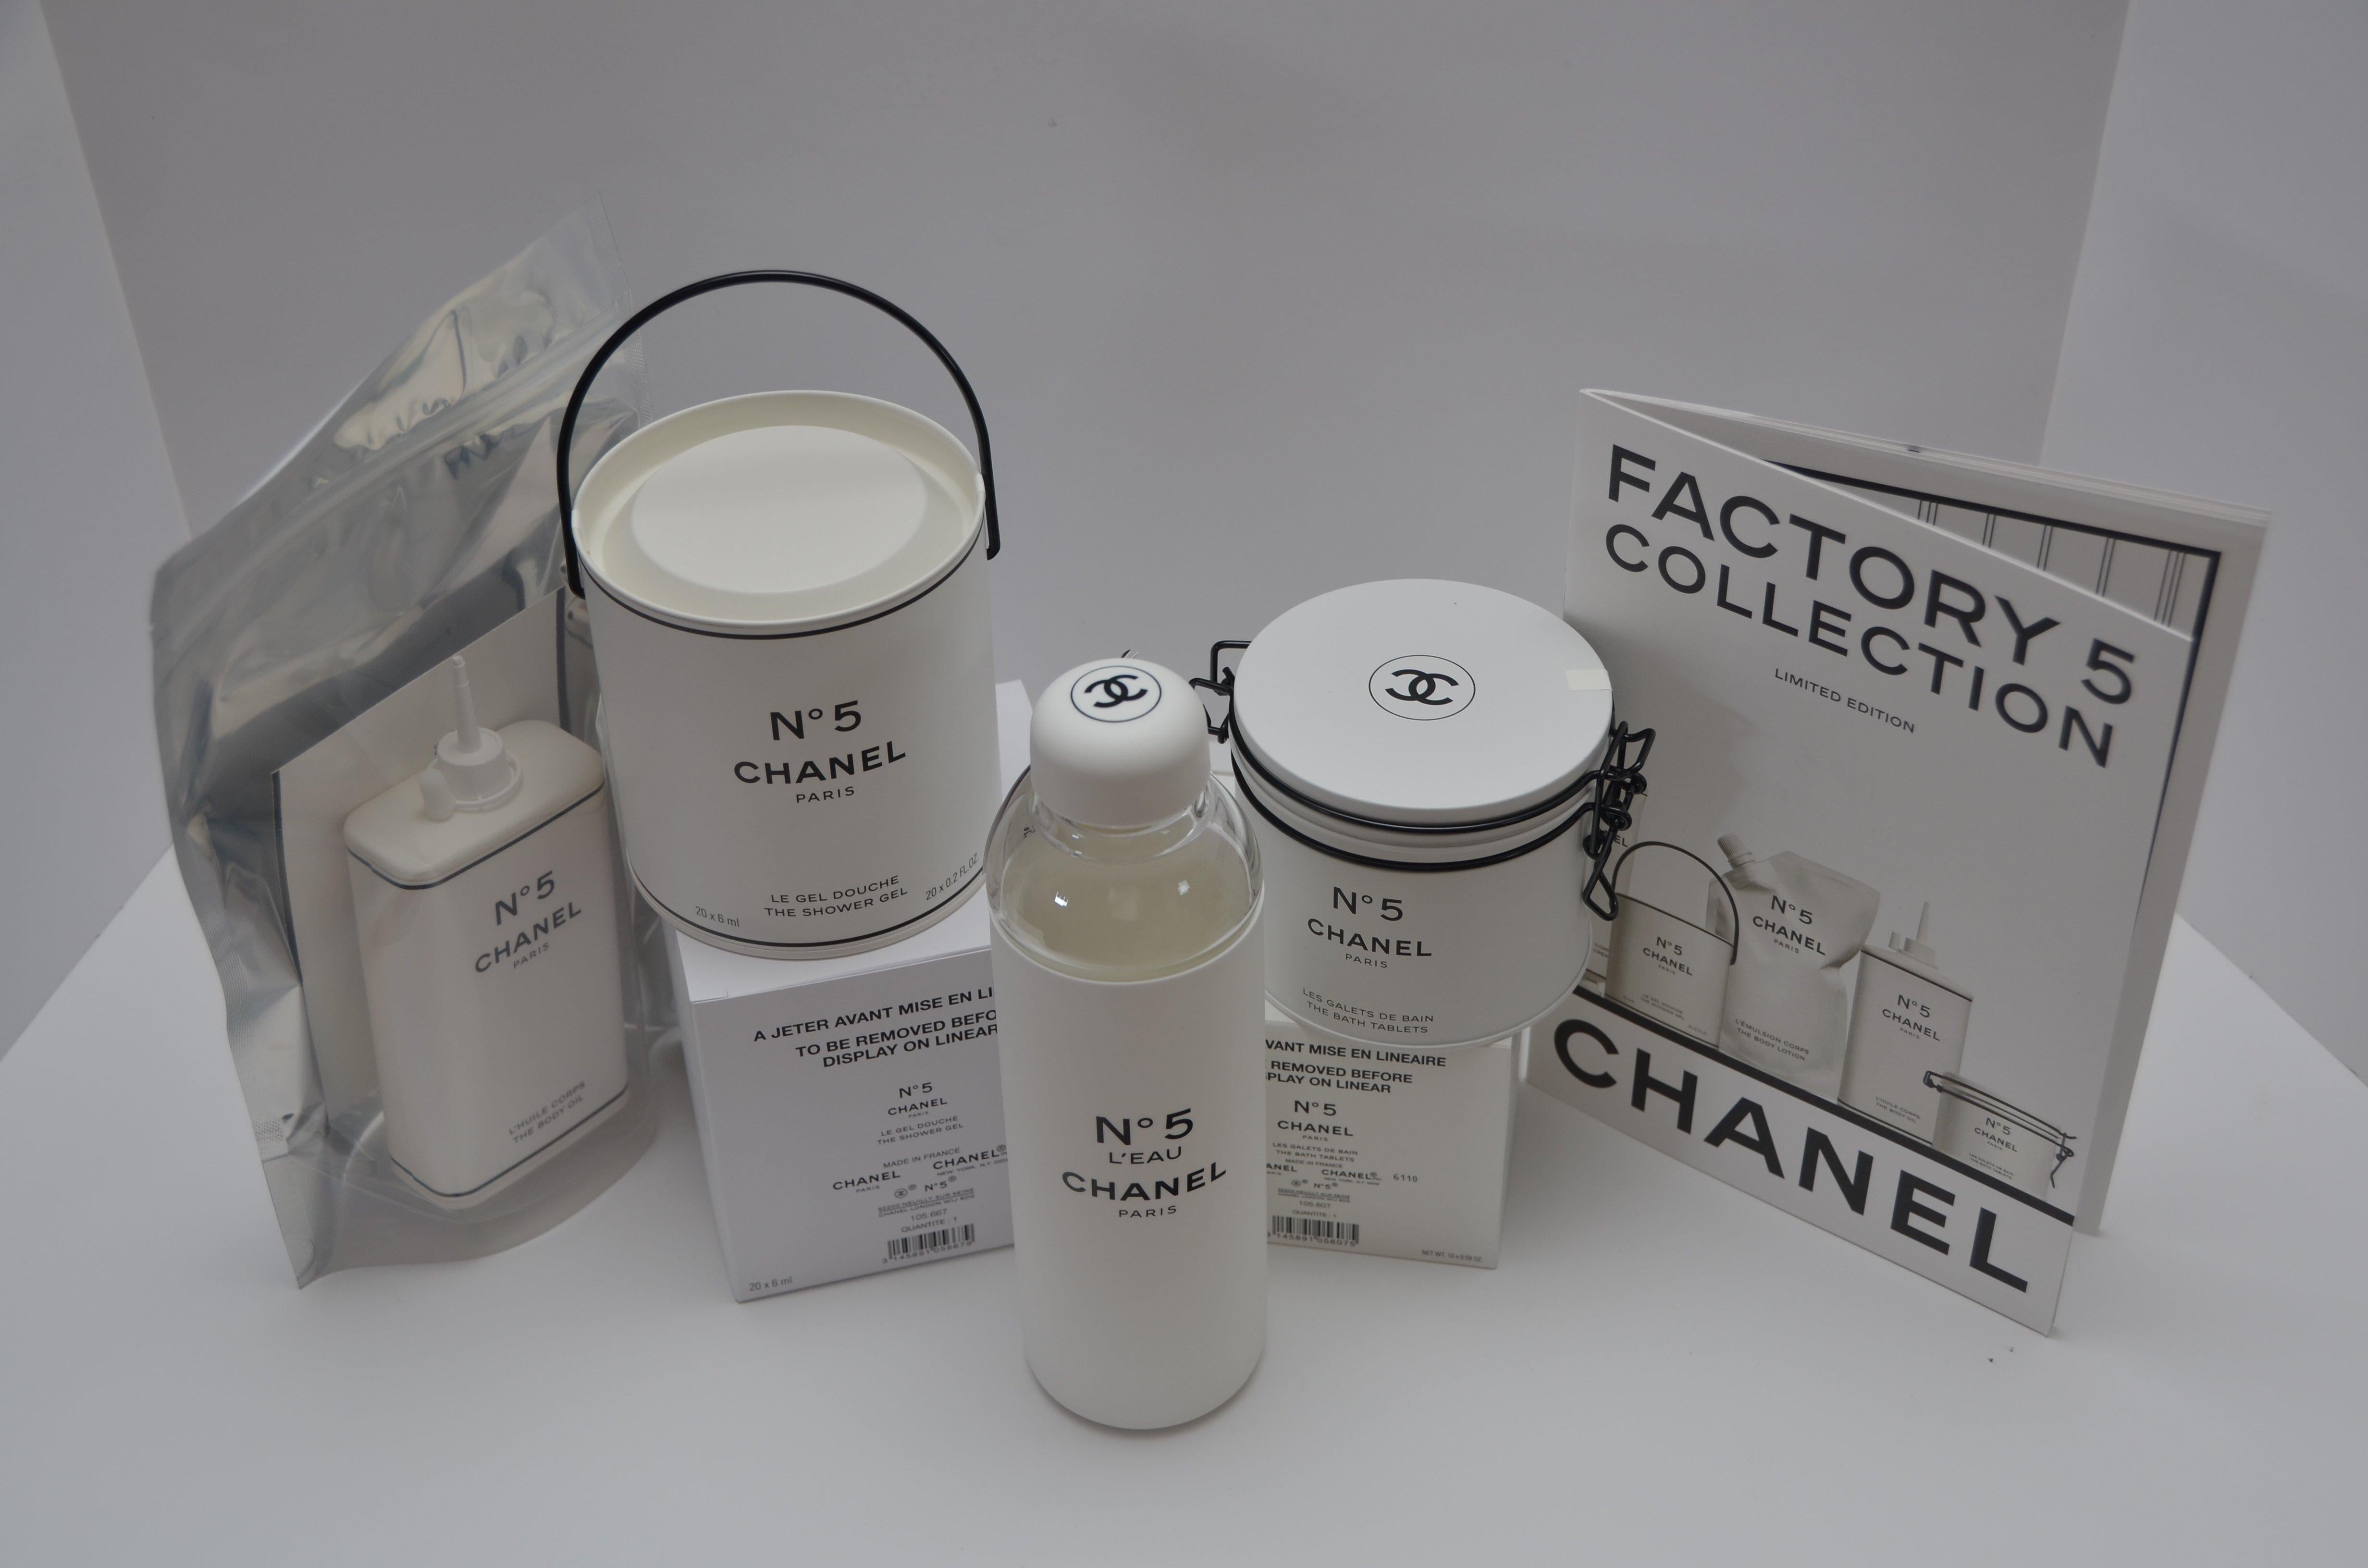 100% guaranteed brand new never used Chanel Factory 5 set total off 4 pieces + booklet that came with this collection 
Please see pictures off whats included in this listing.
Perfect decor for your bathroom.
Water bottle is made of glass and couple